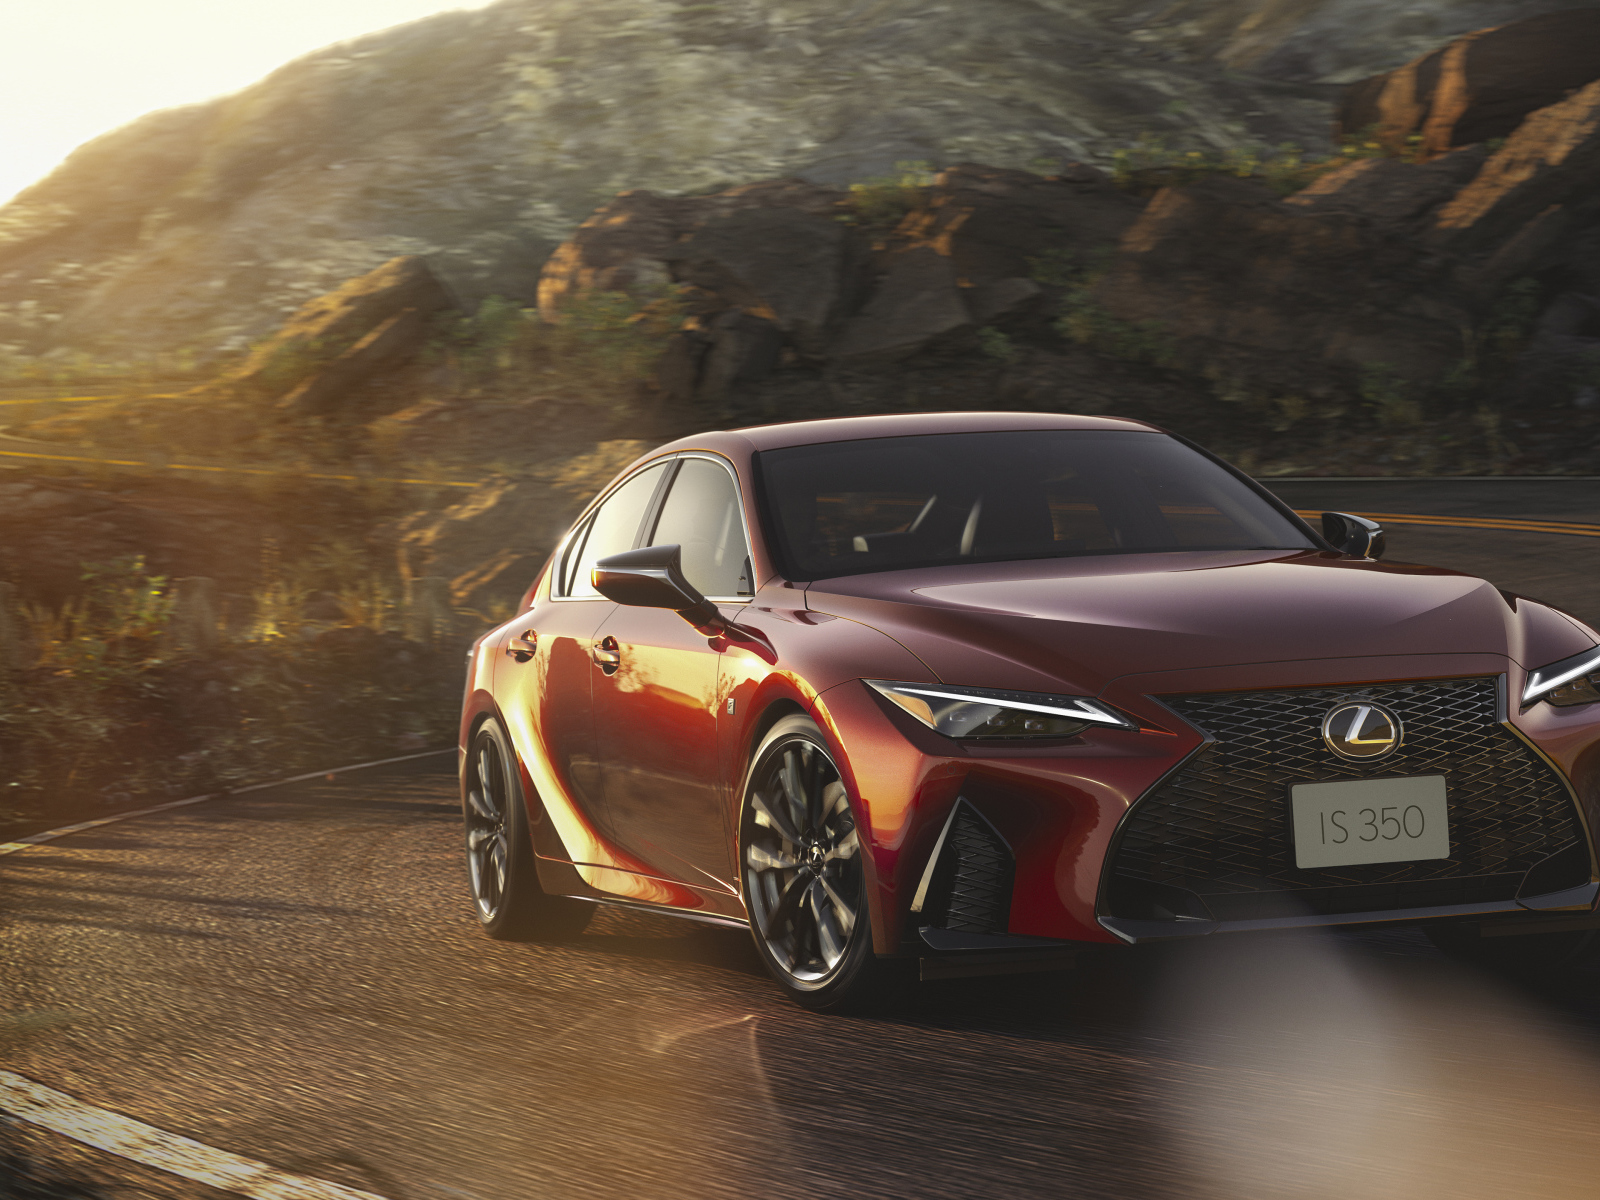 2021 Lexus IS 350 F SPORT red car in the mountains